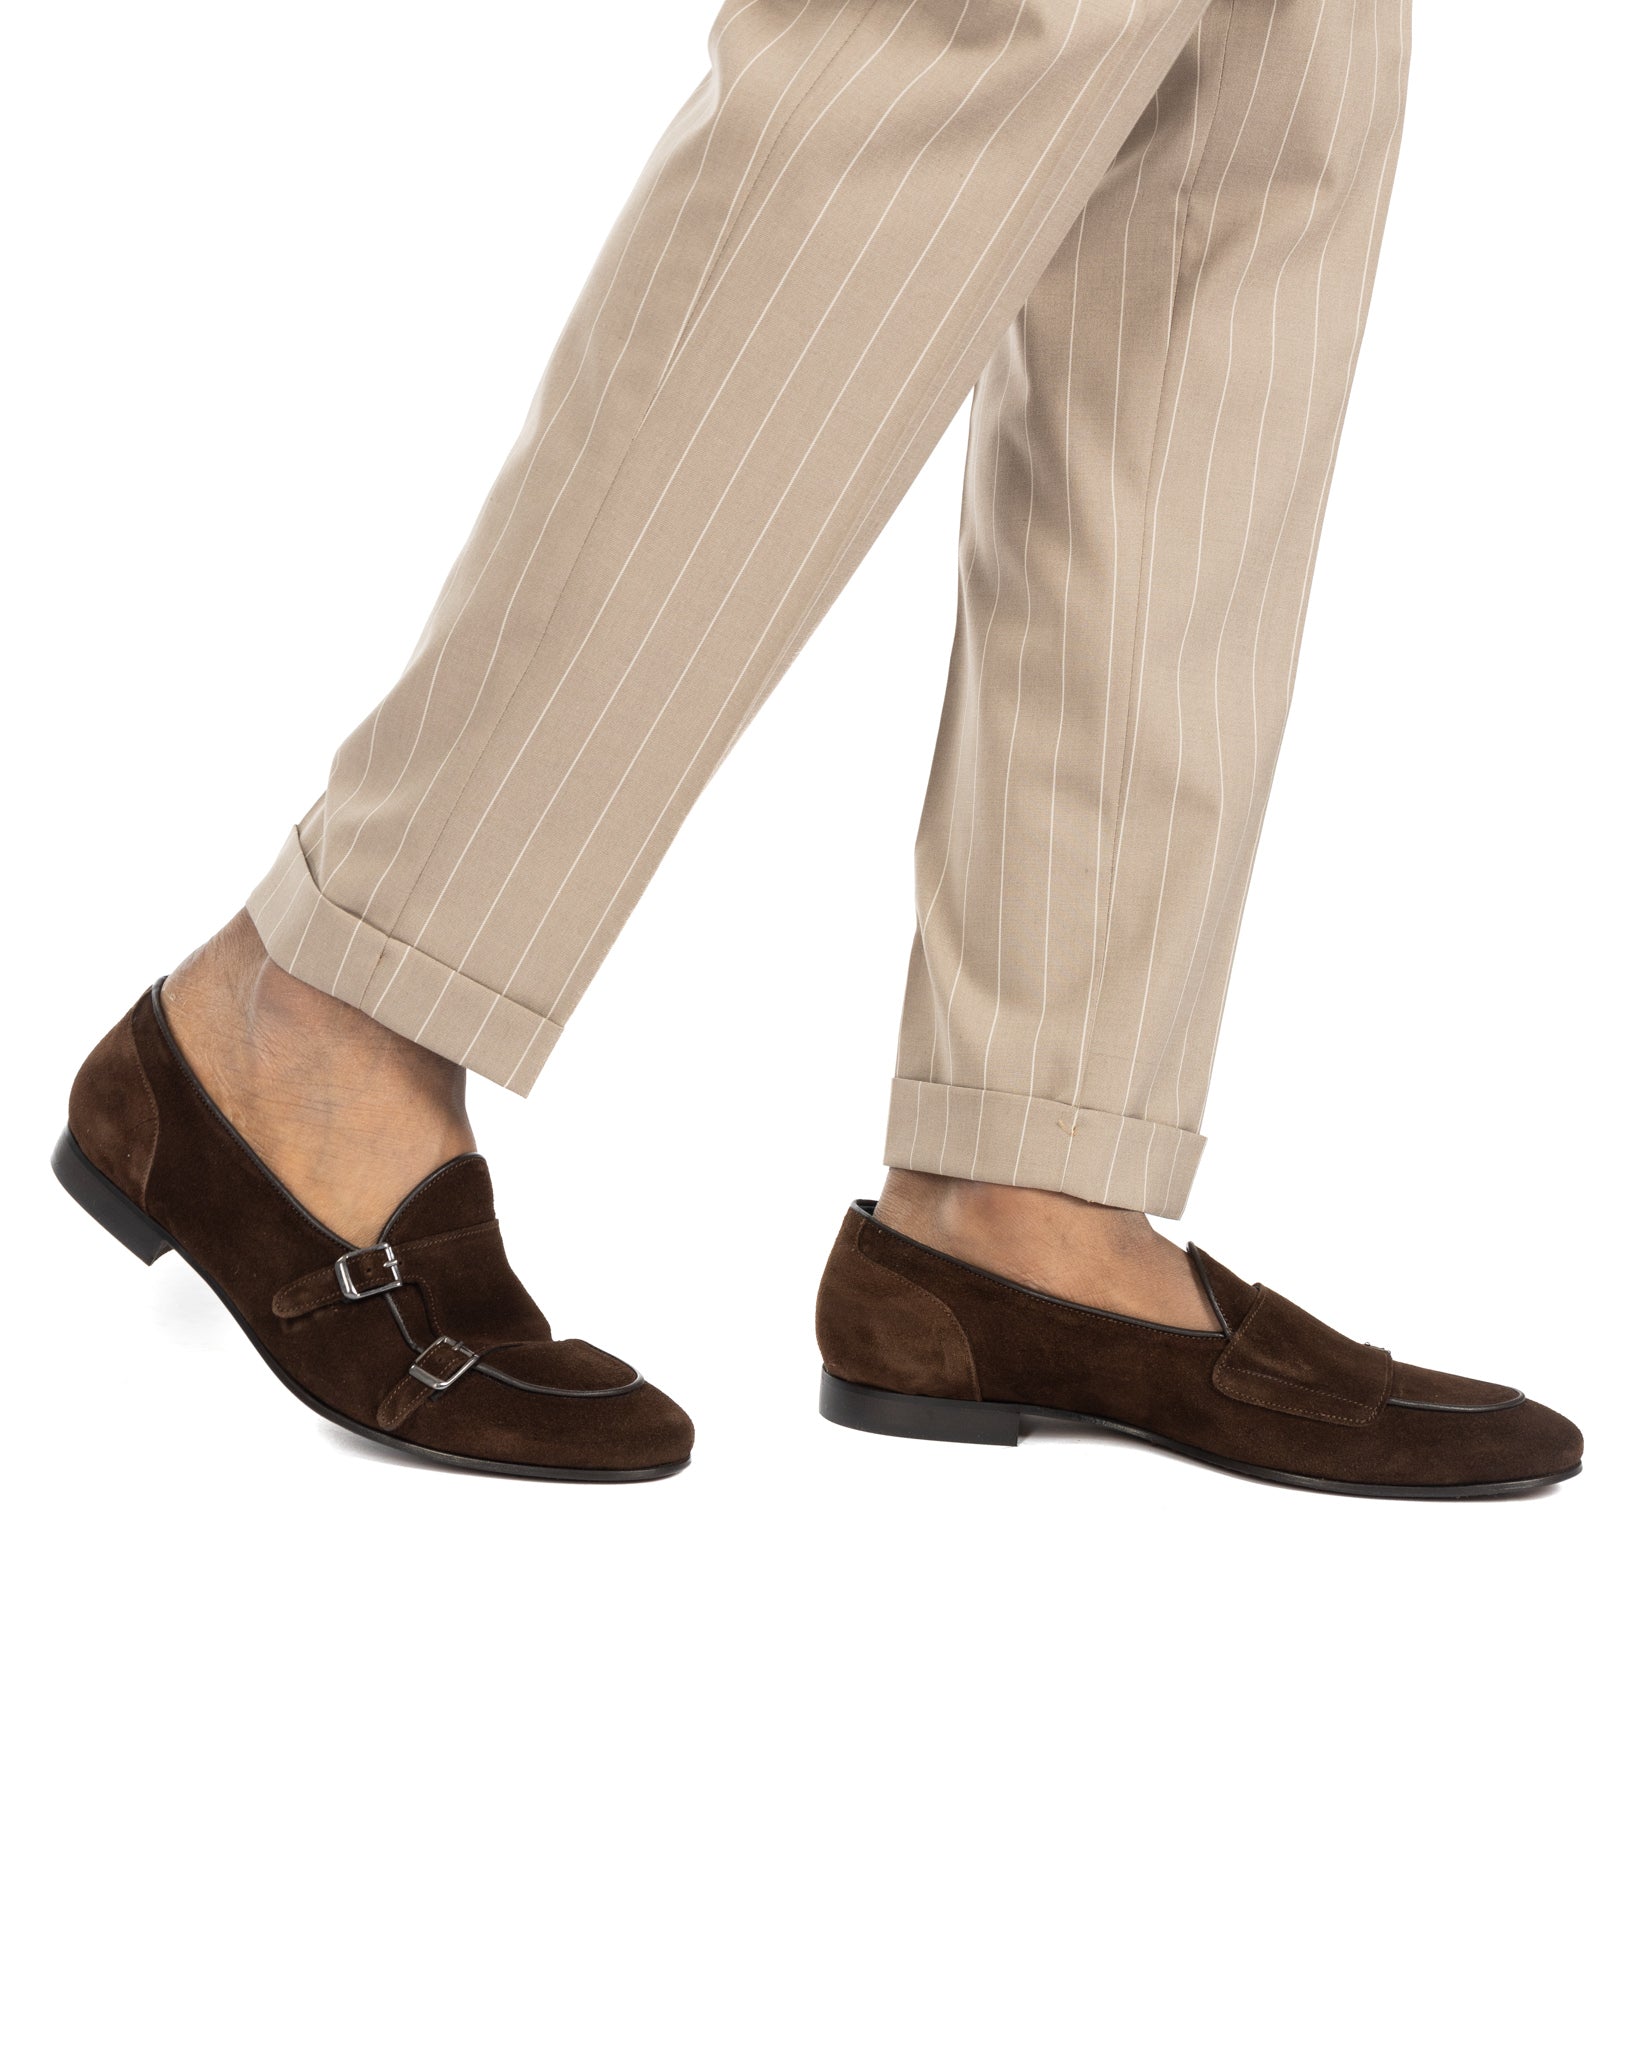 Gianni - dark brown suede moccasin with double buckle